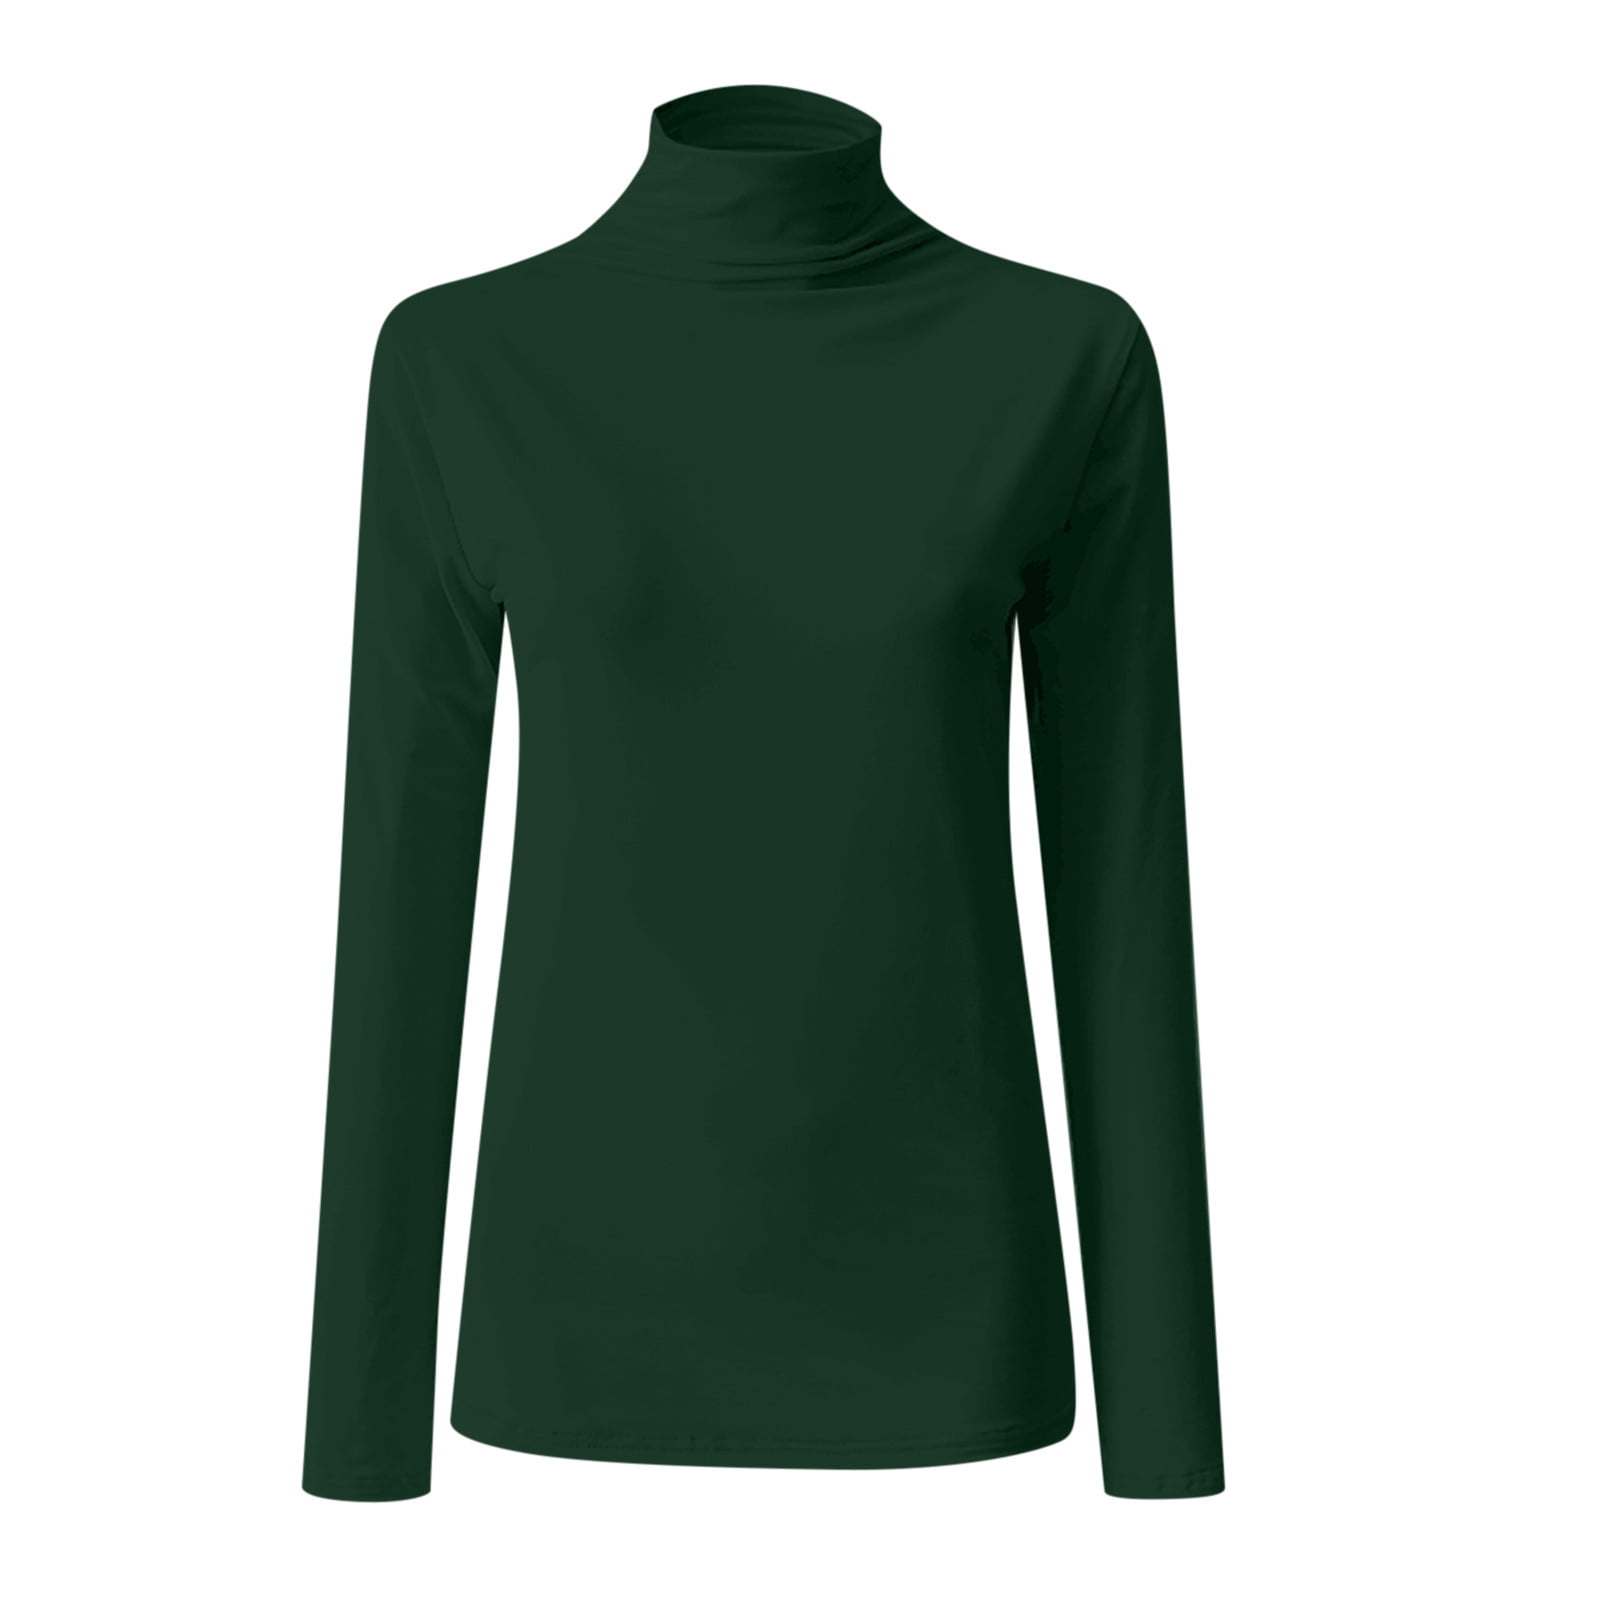 JGGSPWM Womens Turtleneck Casual Slim Fit Basic Undershirts Solid Blouse  Shirts Long Sleeve Pullover Tops Green XL 